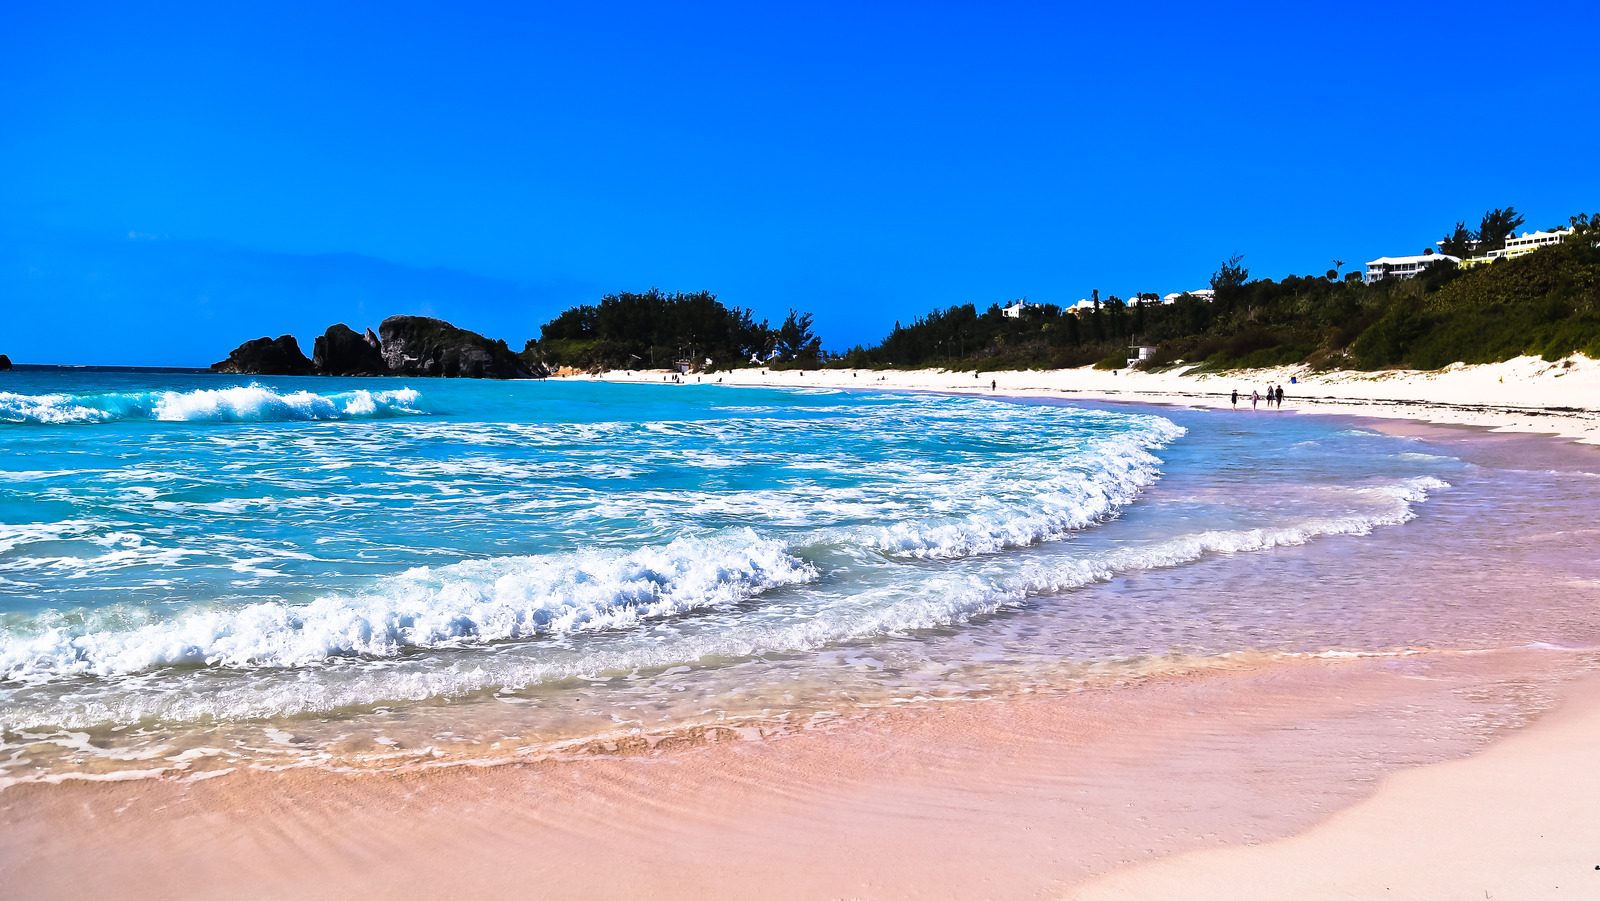 https://www.explore.com/img/gallery/take-in-beautiful-crystal-clear-water-and-pink-sand-views-at-this-popular-bermuda-beach/l-intro-1698662072.jpg